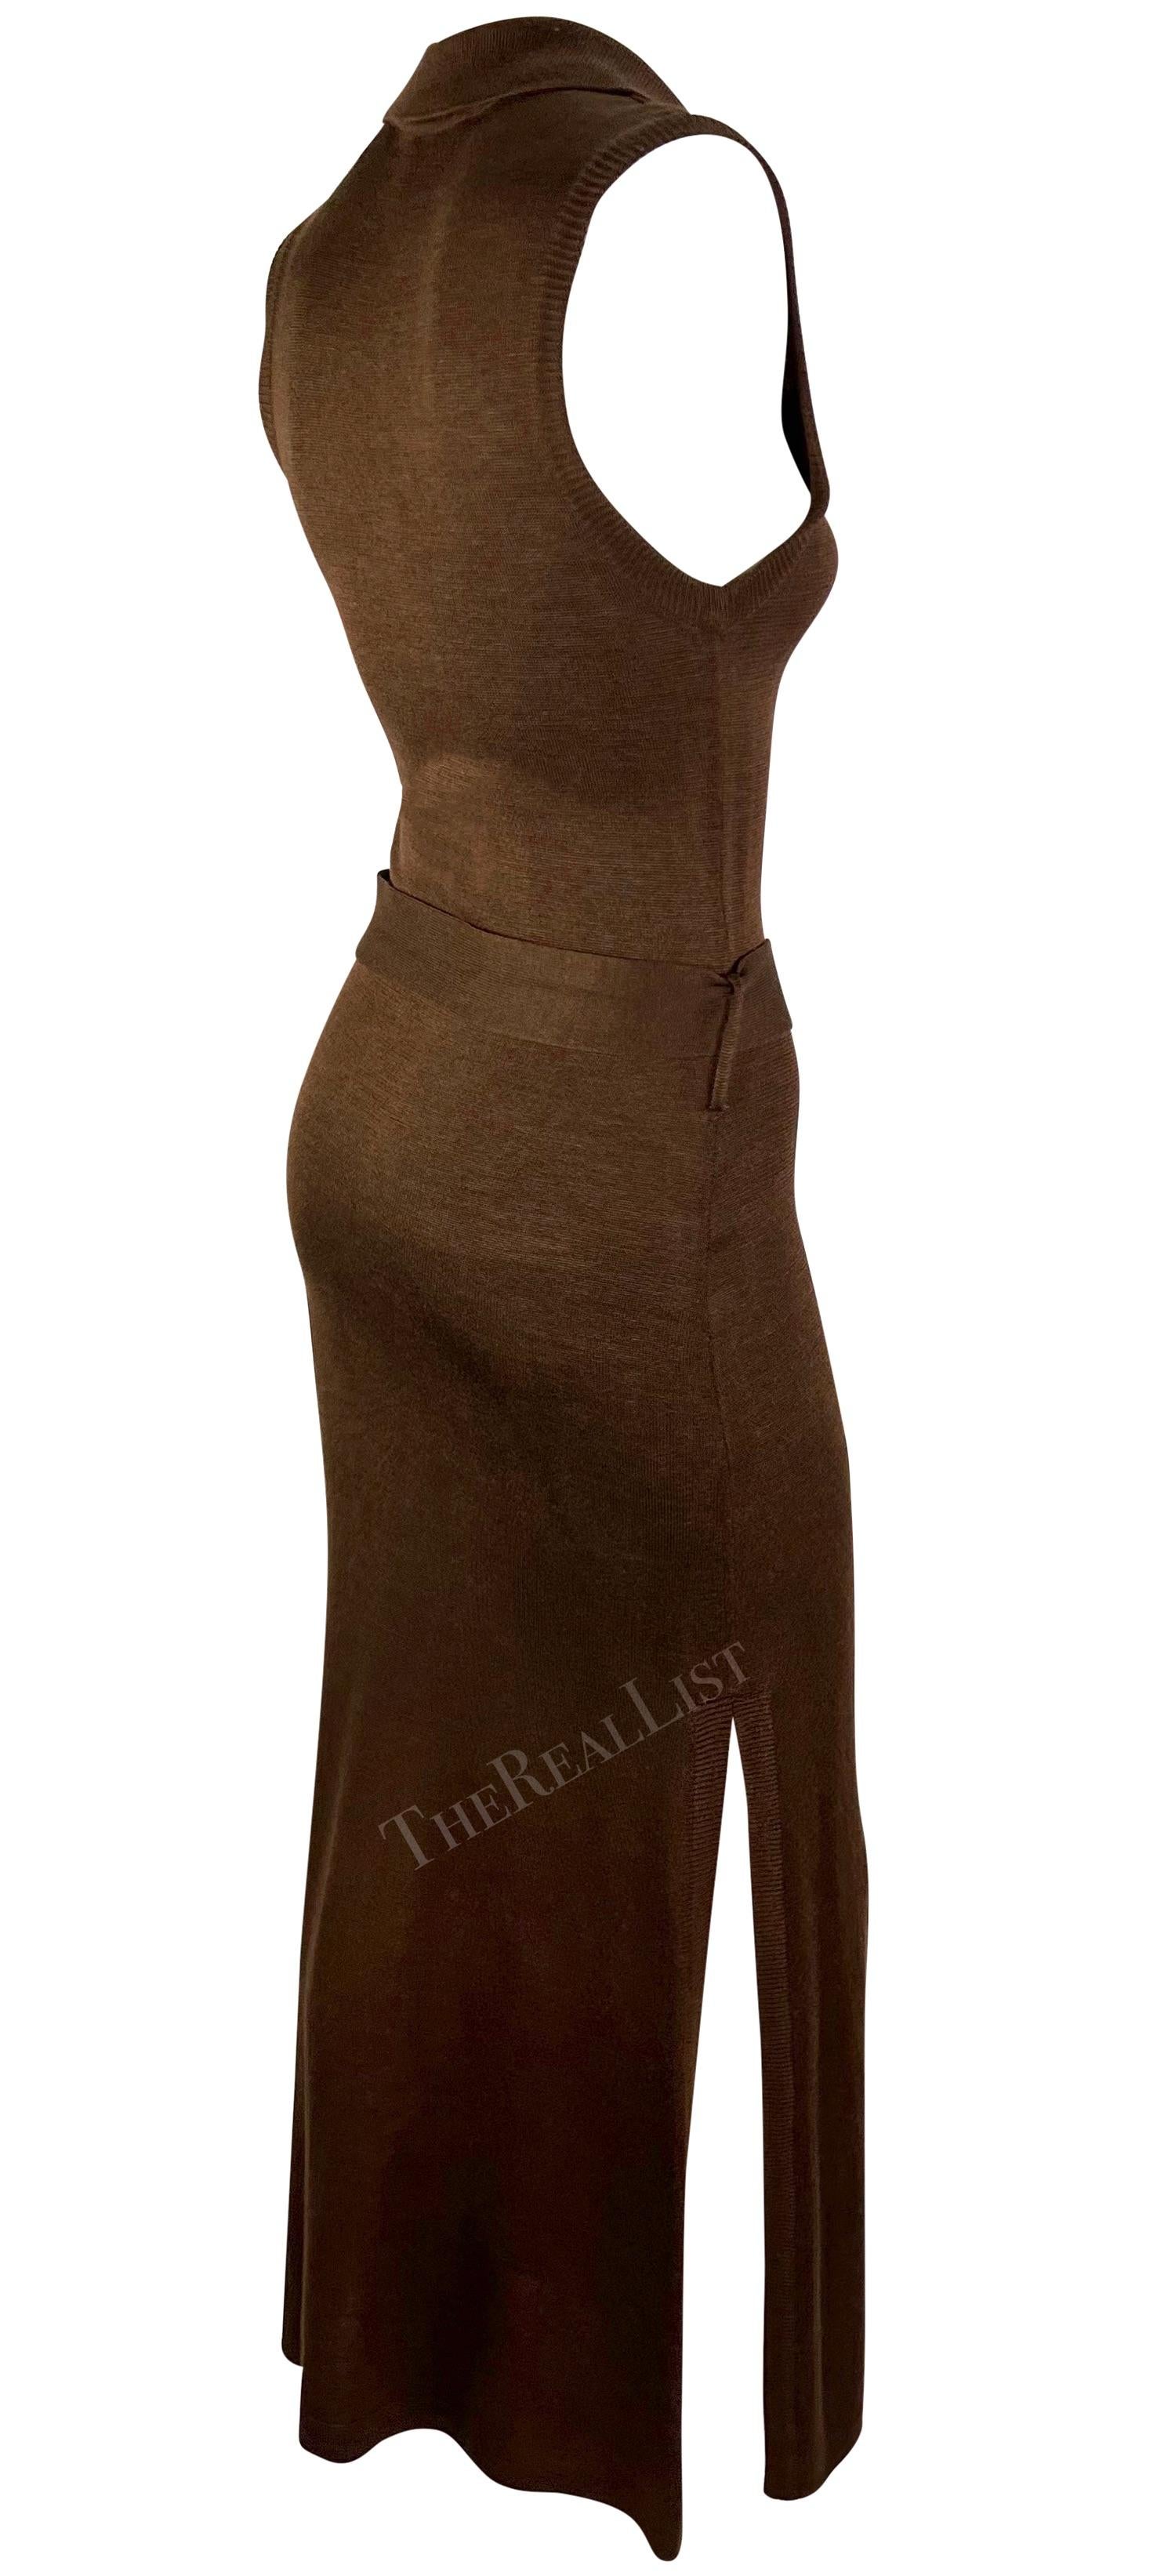 S/S 1996 Dolce & Gabbana Runway Brown Knit Bodycon Belted Maxi Collared Dress For Sale 2